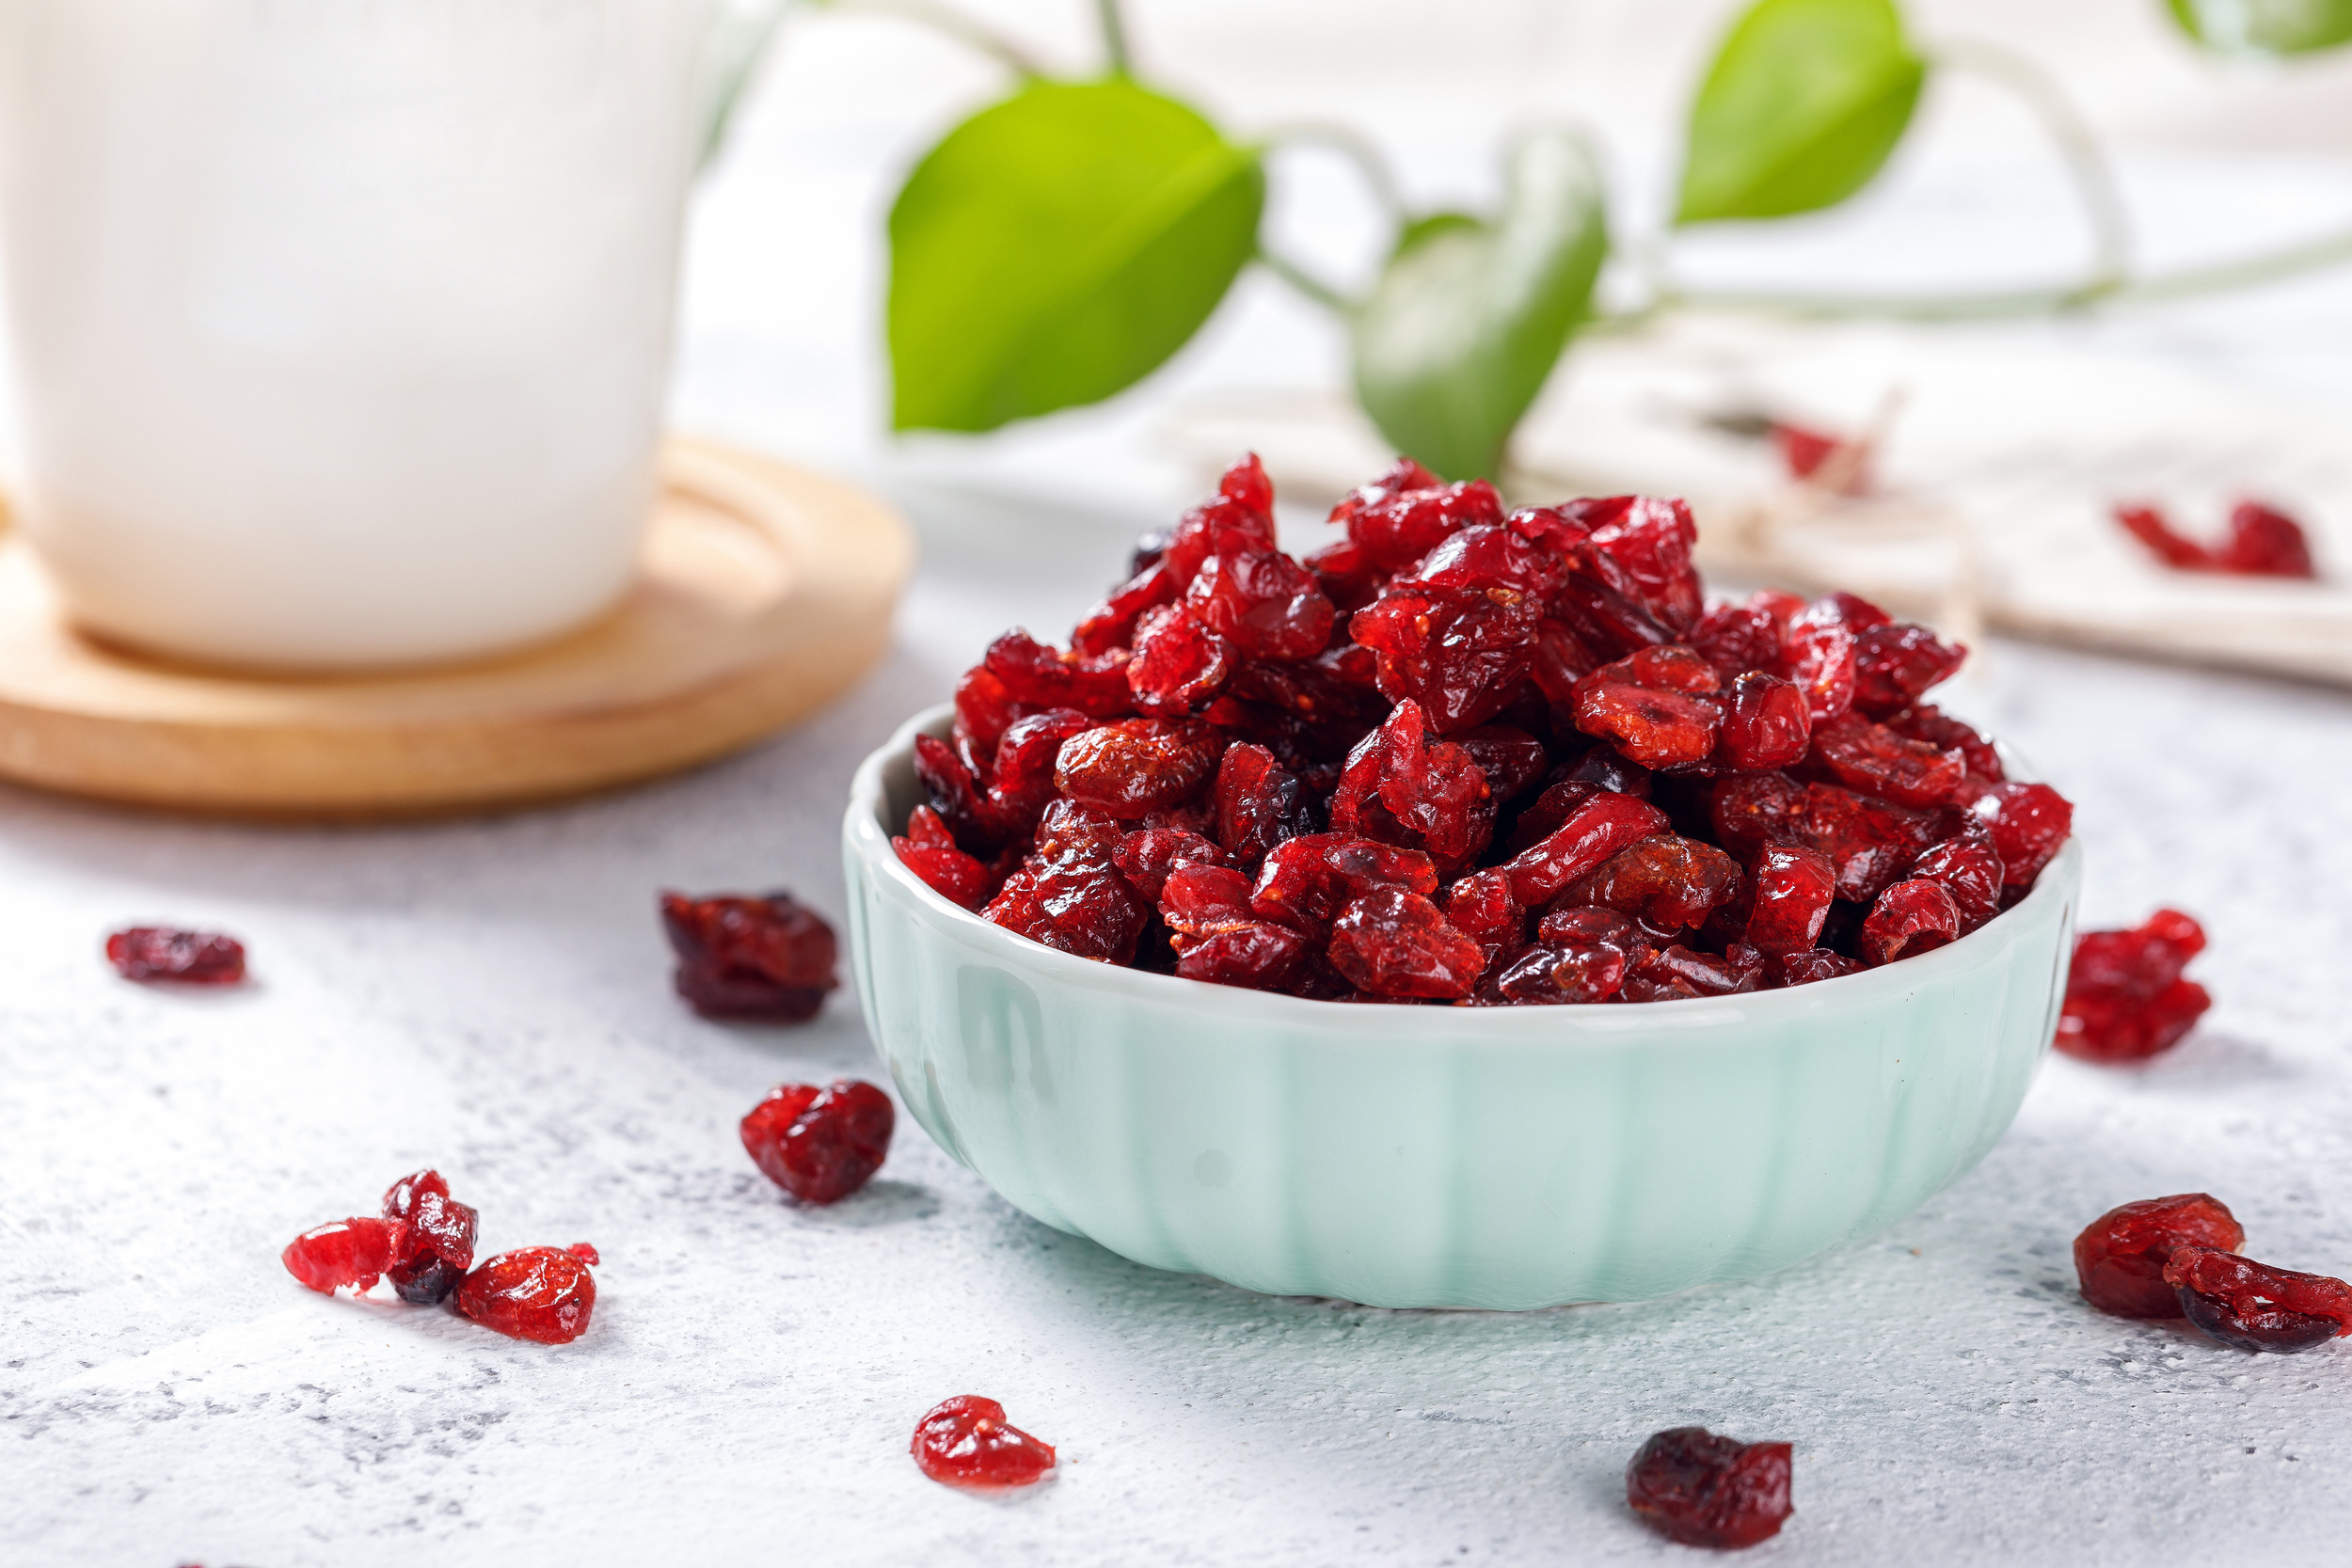 <p>If you’re not a raisin fan (we are; more on that later), you might still be down with dried cranberries. They’re about the same size and consistency of a raisin but with added tartness along with the sweetness. Cranberries also contain potassium, calcium, and numerous antioxidants.</p><p>You may also like: <a href='https://www.yardbarker.com/lifestyle/articles/easy_and_delicious_apple_desserts_the_whole_family_will_enjoy_021424/s1__21989671'>Easy and delicious apple desserts the whole family will enjoy</a></p>